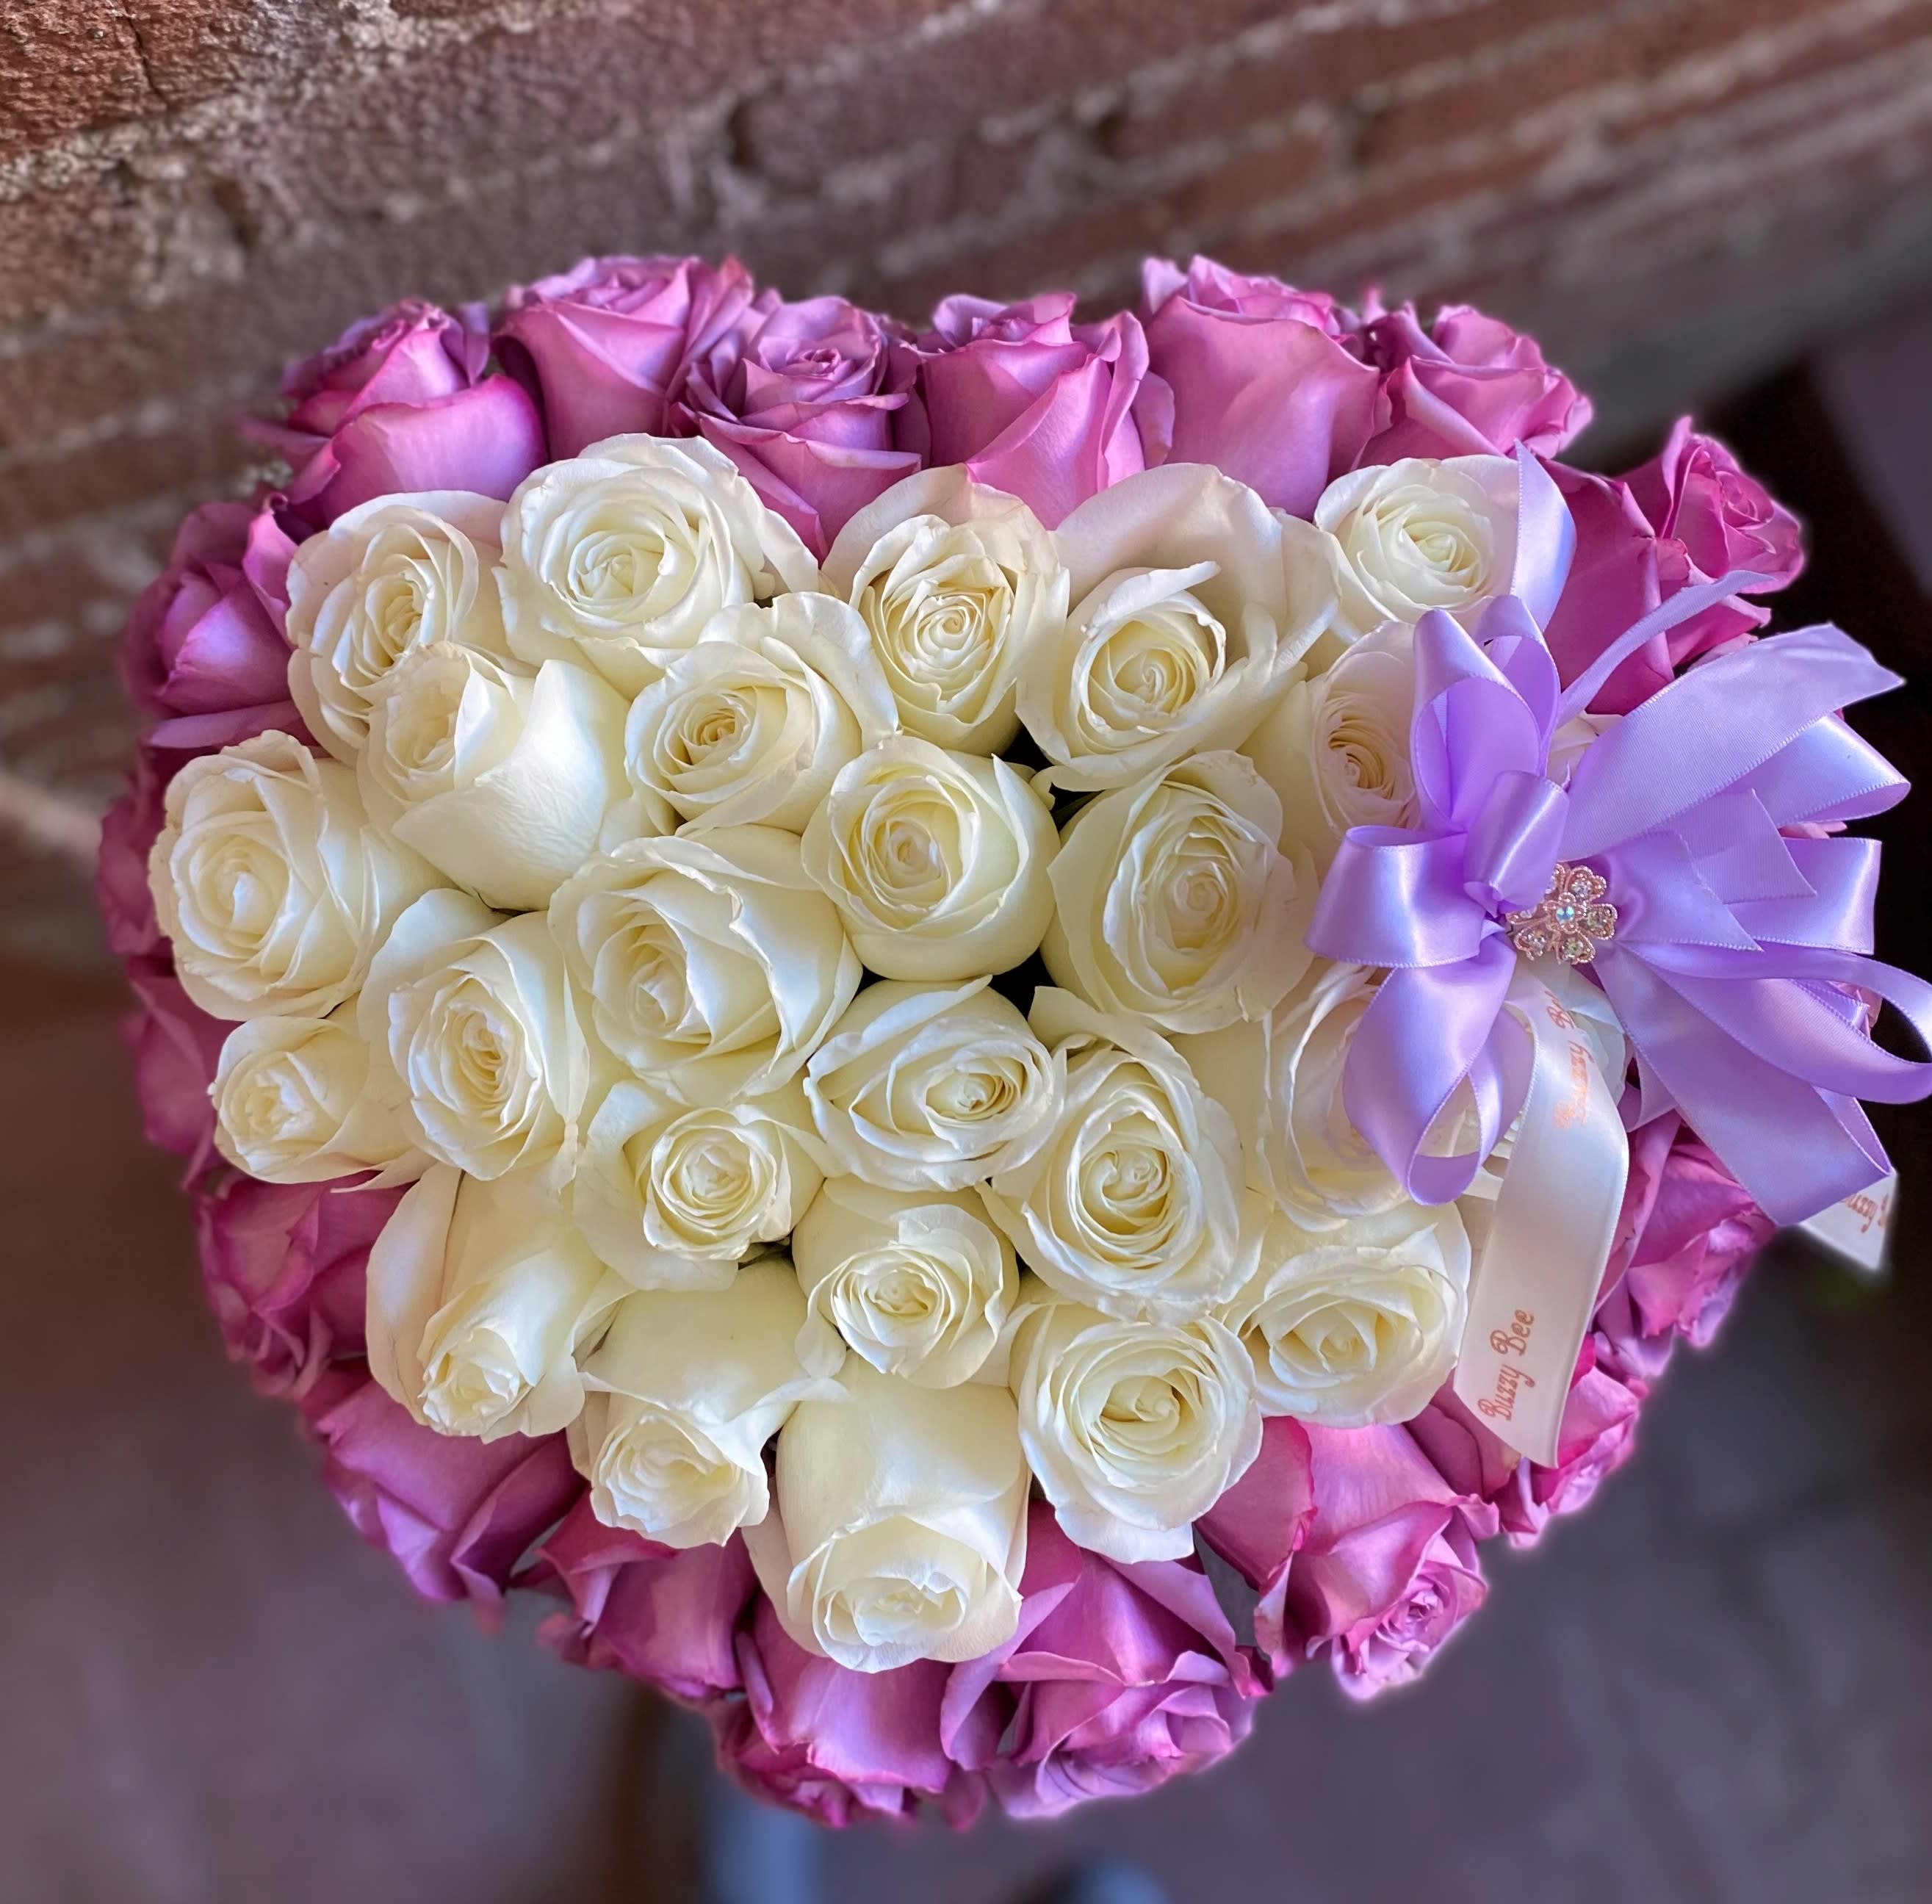 Rose Box Pink and White - Pasadena Flowers - This beautiful arrangement is designed to deliver happiness to a loved ones day. Includes 50 Roses total, Filled with beautiful white Roses in the center from the Netherlands, surrounded by blush Pink Roses, and customized to perfection, this arrangement is a showstopper! If you want to turn heads then this is the arrangement for you!